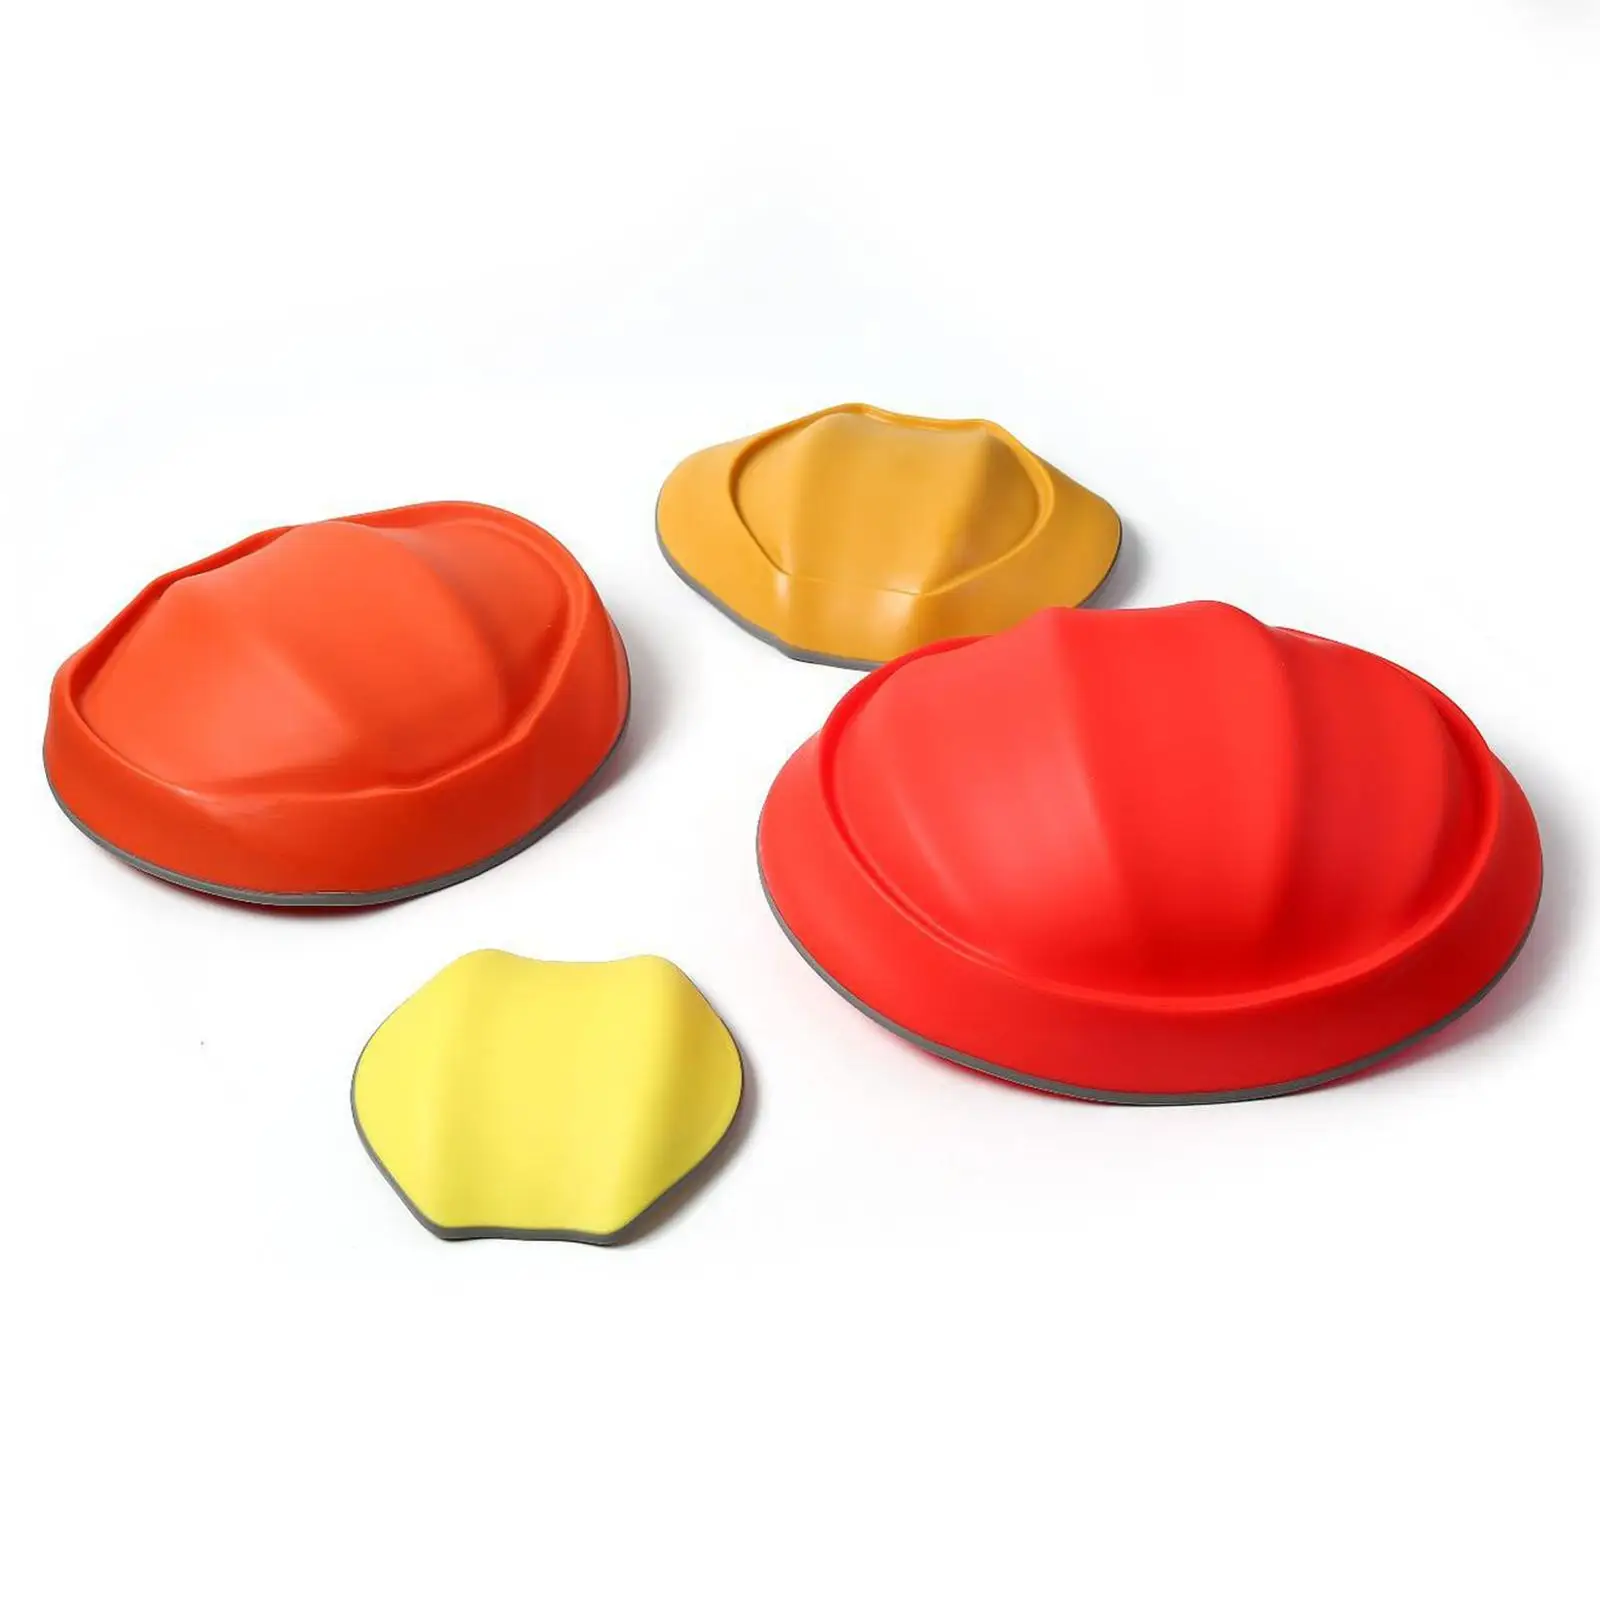 4Pcs Stepping Stones Sensory Toys Promotes Balance Coordination Balance River Stones for Ages over 3 Boys Family